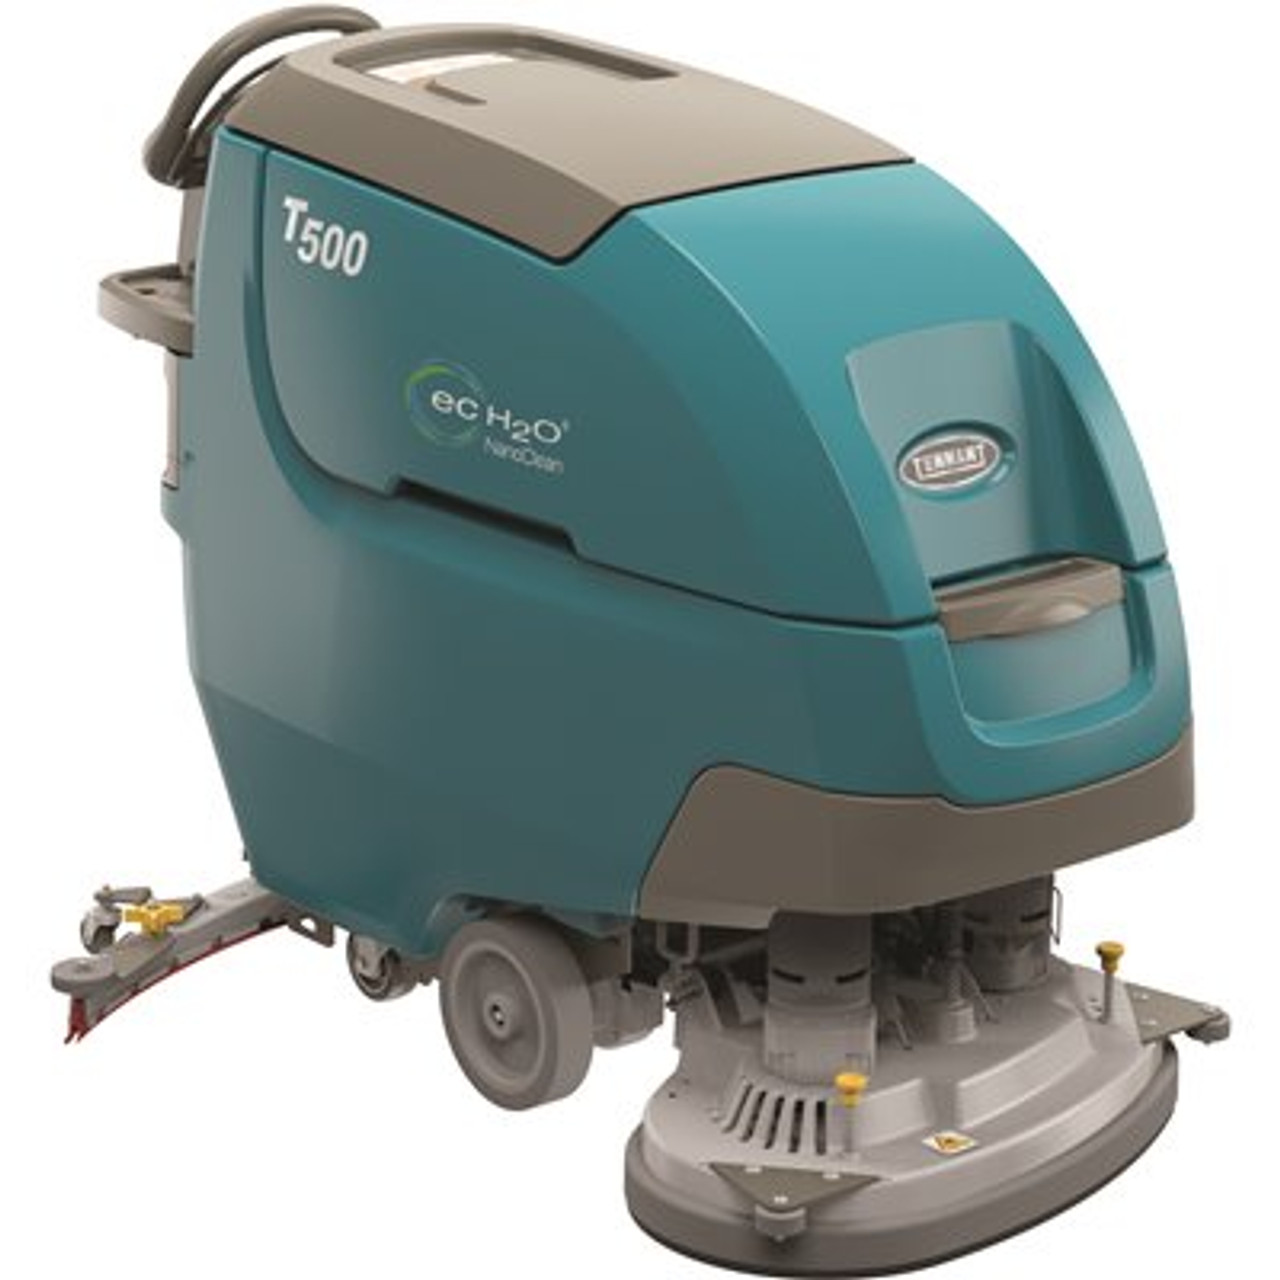 T500 WB, Disk Scrubber, 28", Pro Control Panel, 225AH Battery, Smart-Fill, ec-H20 cleaning, On-Board Charger, Auto Fill